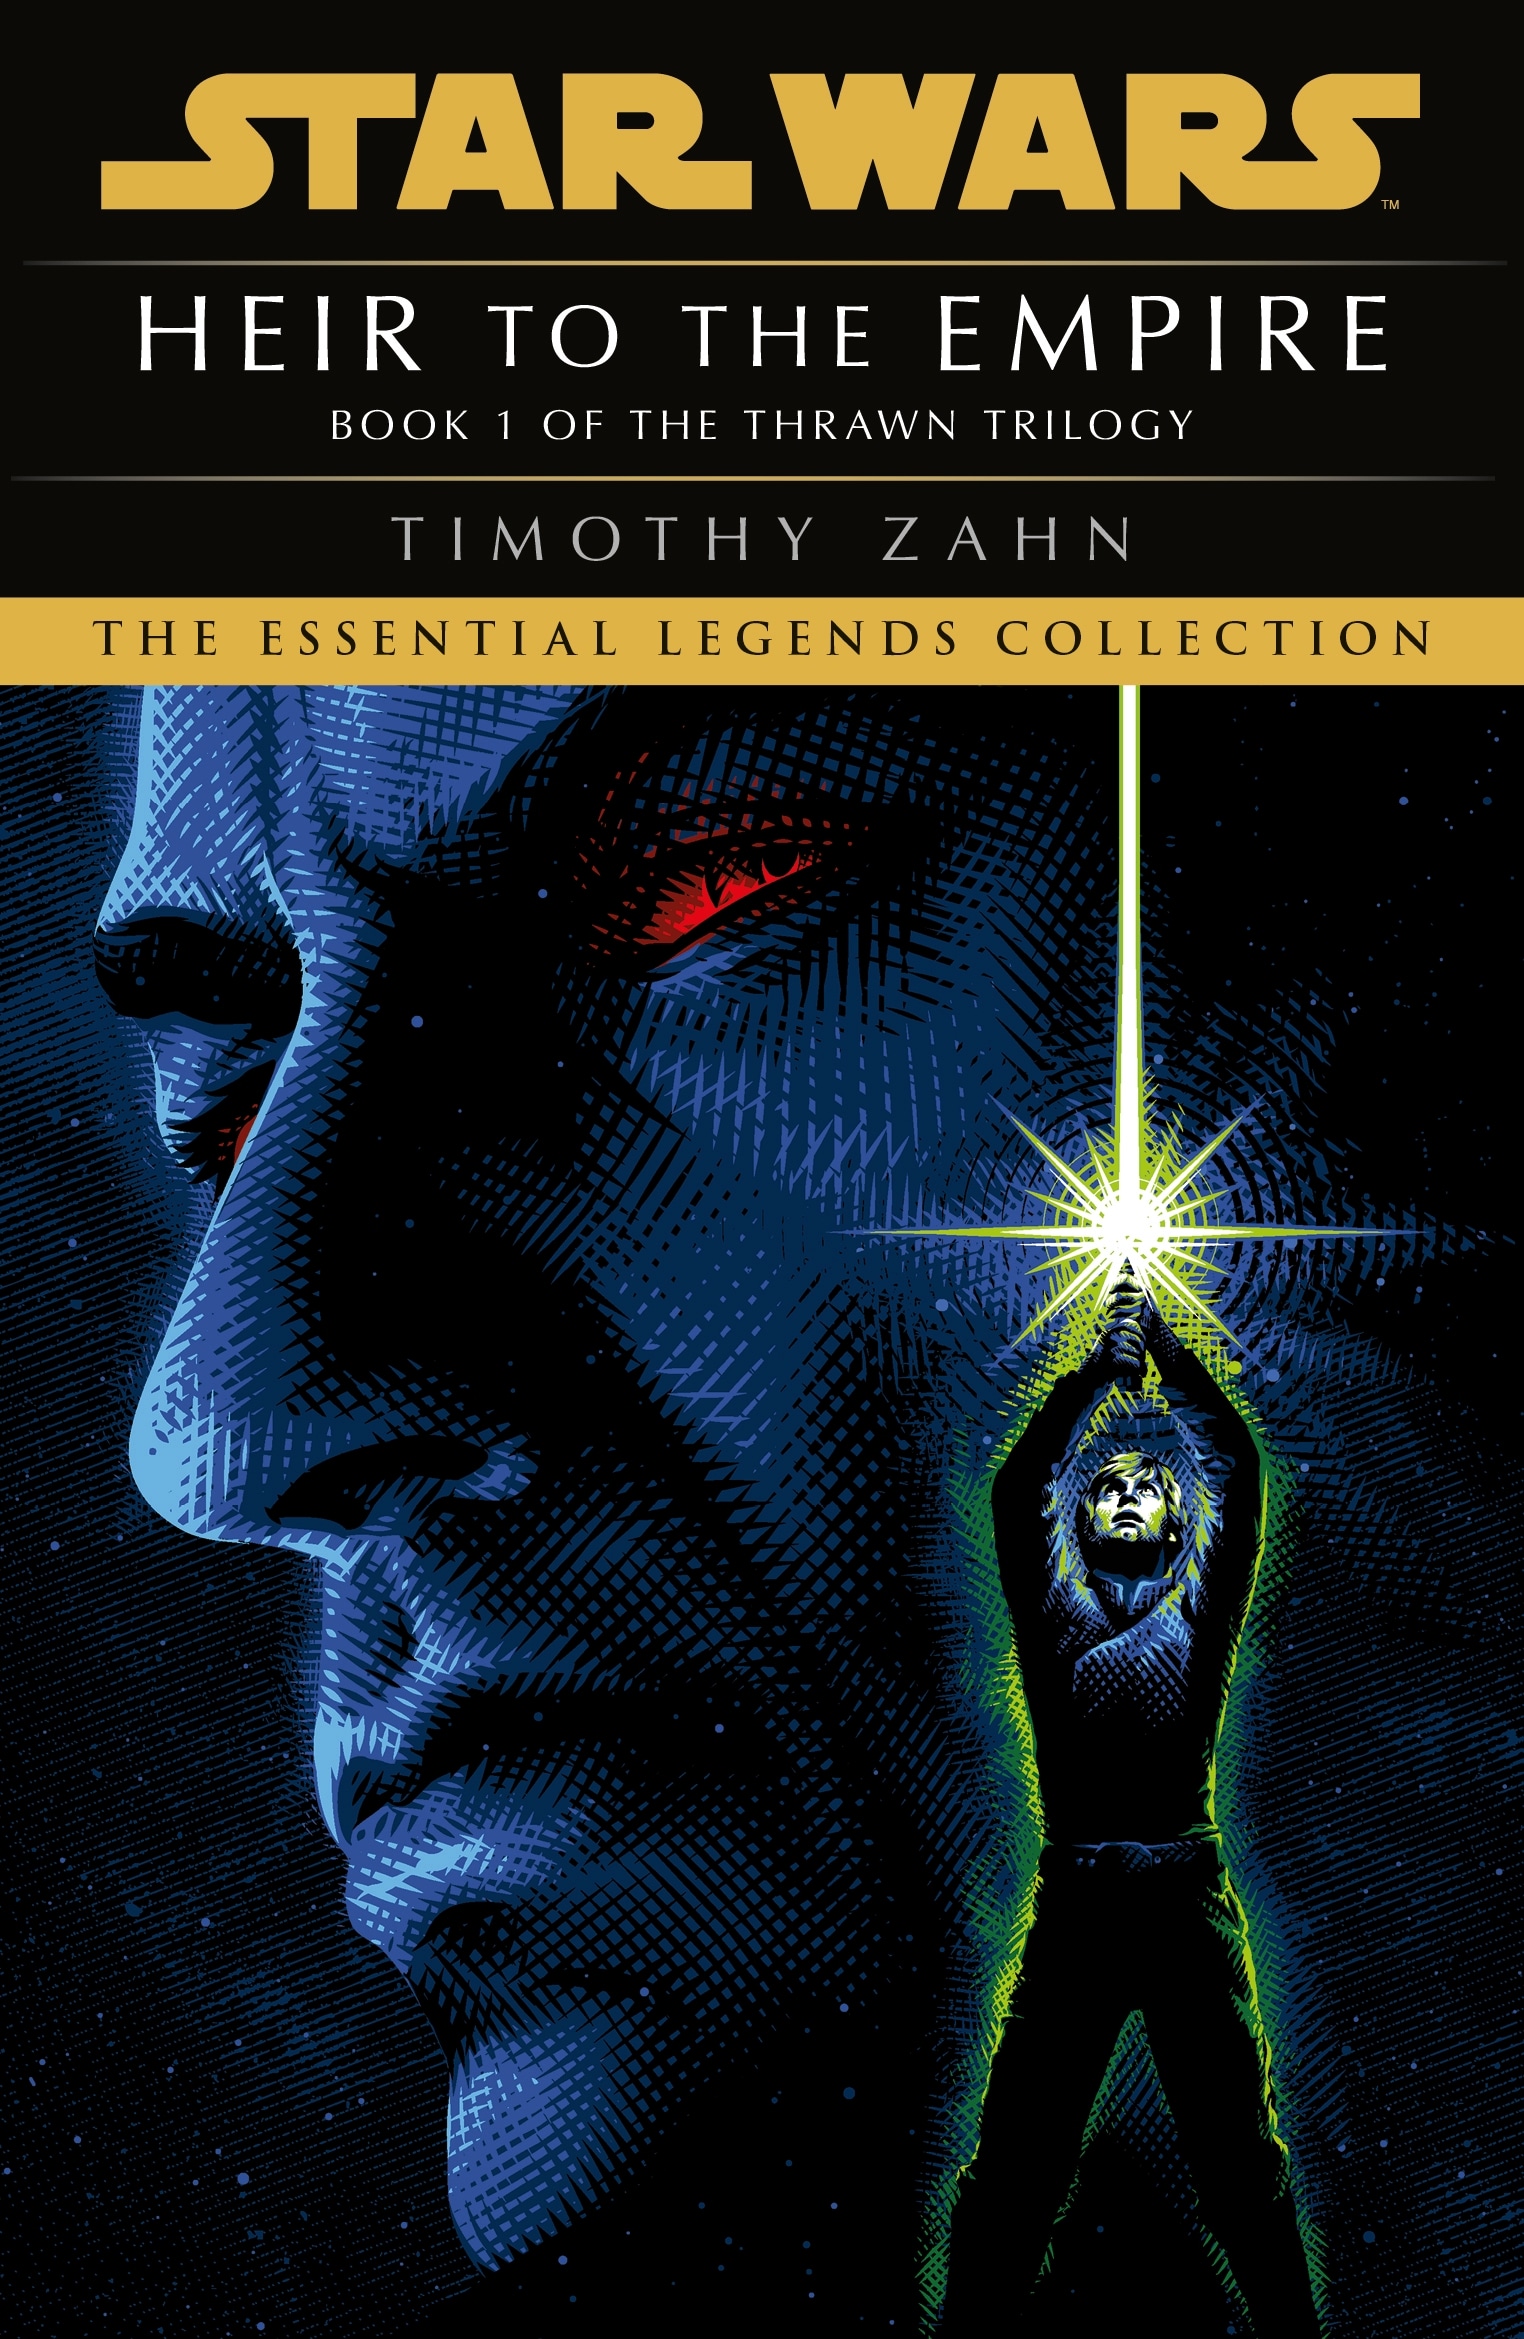 Book “Heir to the Empire” by Timothy Zahn — July 1, 2021